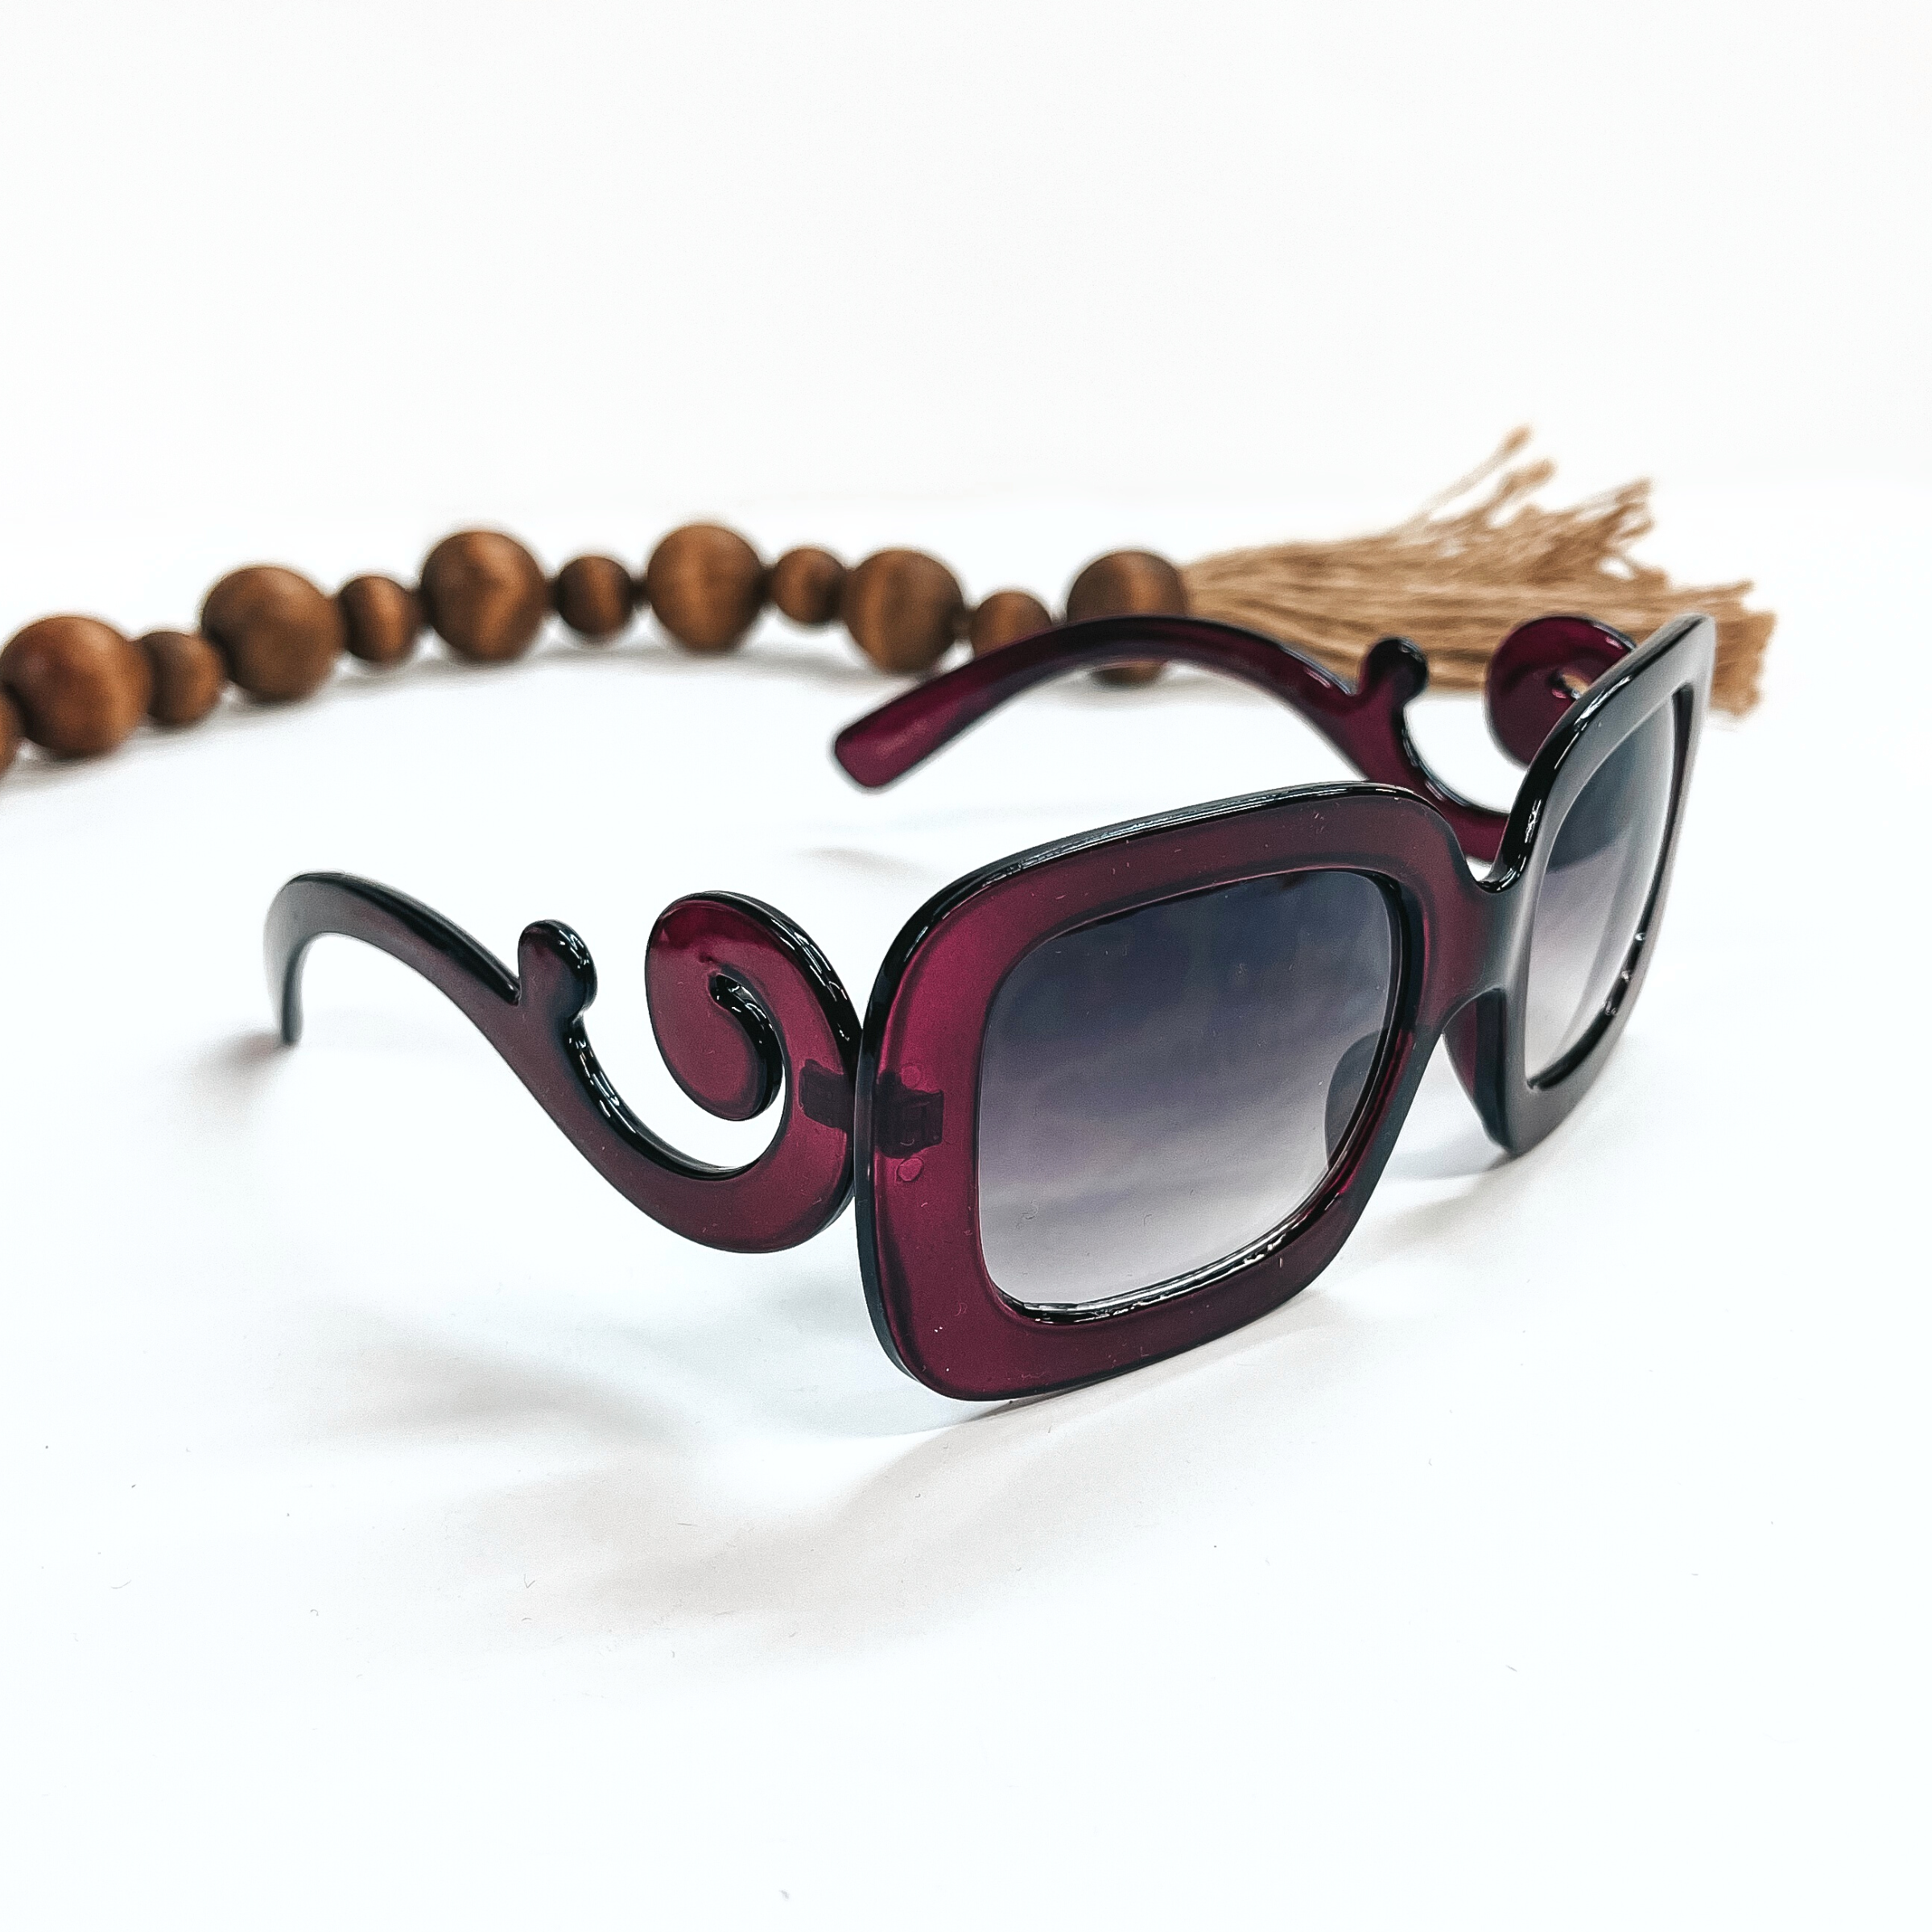 This is a pair of purple frame sunglasses, square rounded shape with a dark grey/black  lense. The sides of the sunglasses have a large swirls. These sunglasses are taken  on a white background with dark brown beads and brown tassel in the back as decor.